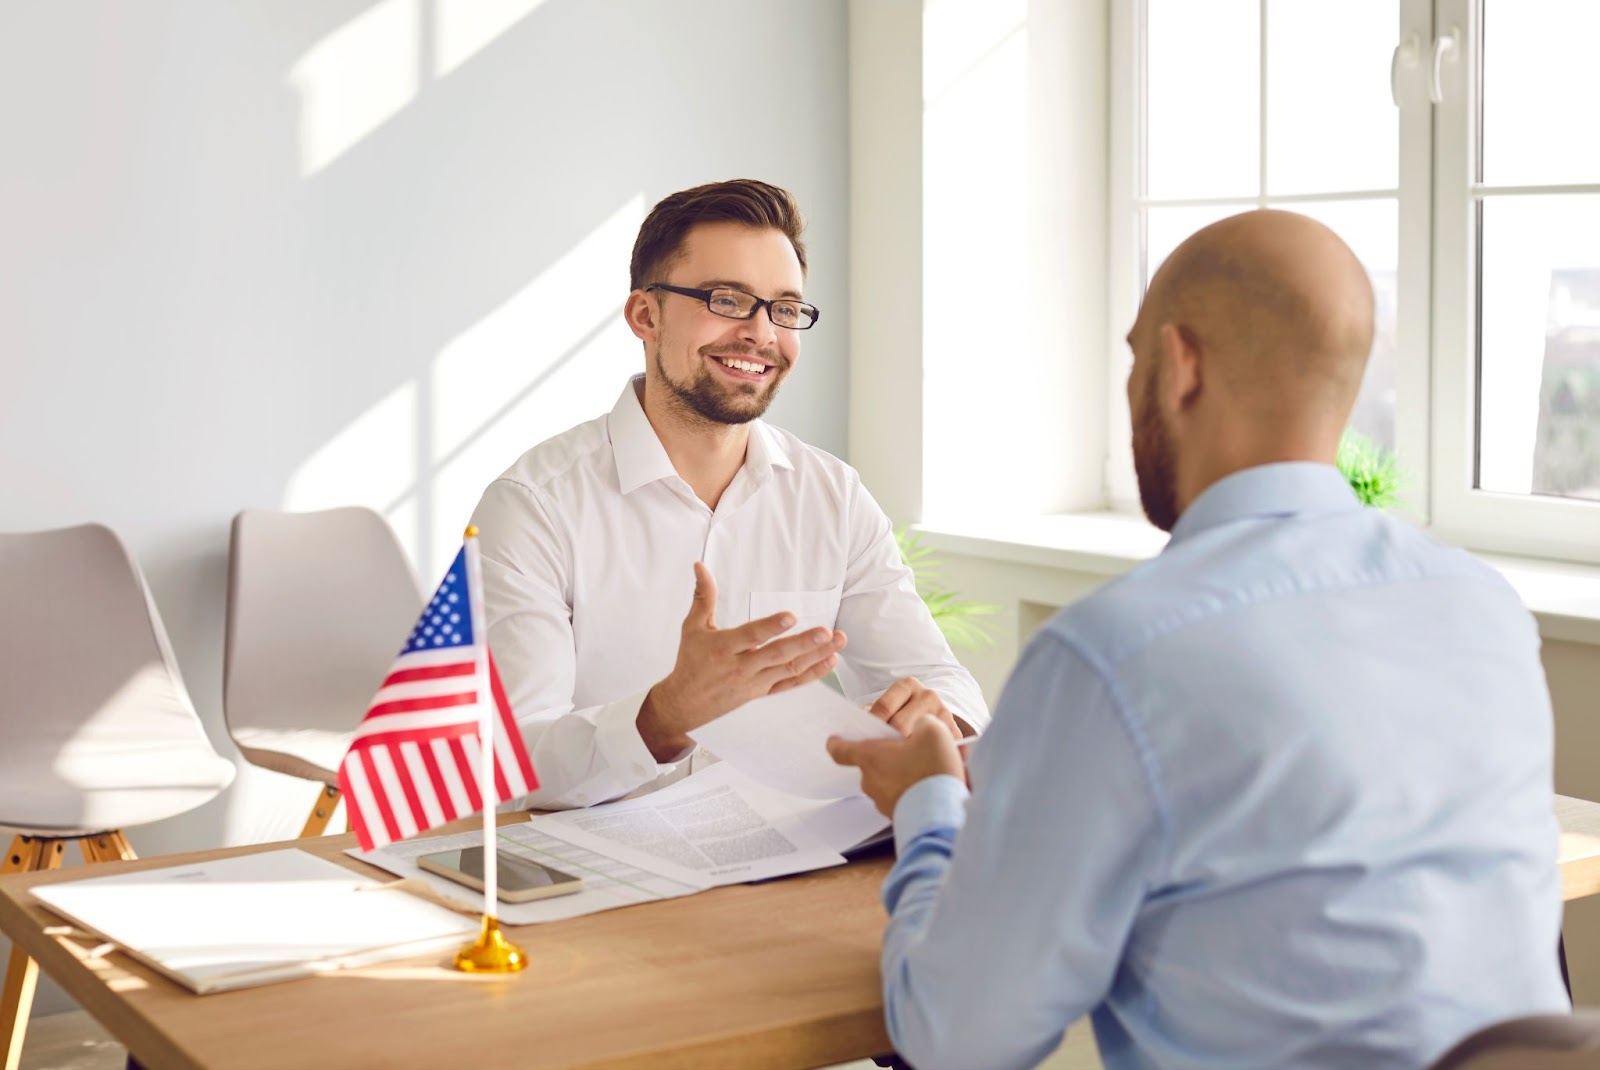 A man and woman sitting at a table with an American flag,discussing visa consultation and EB-1A Visa requirements.